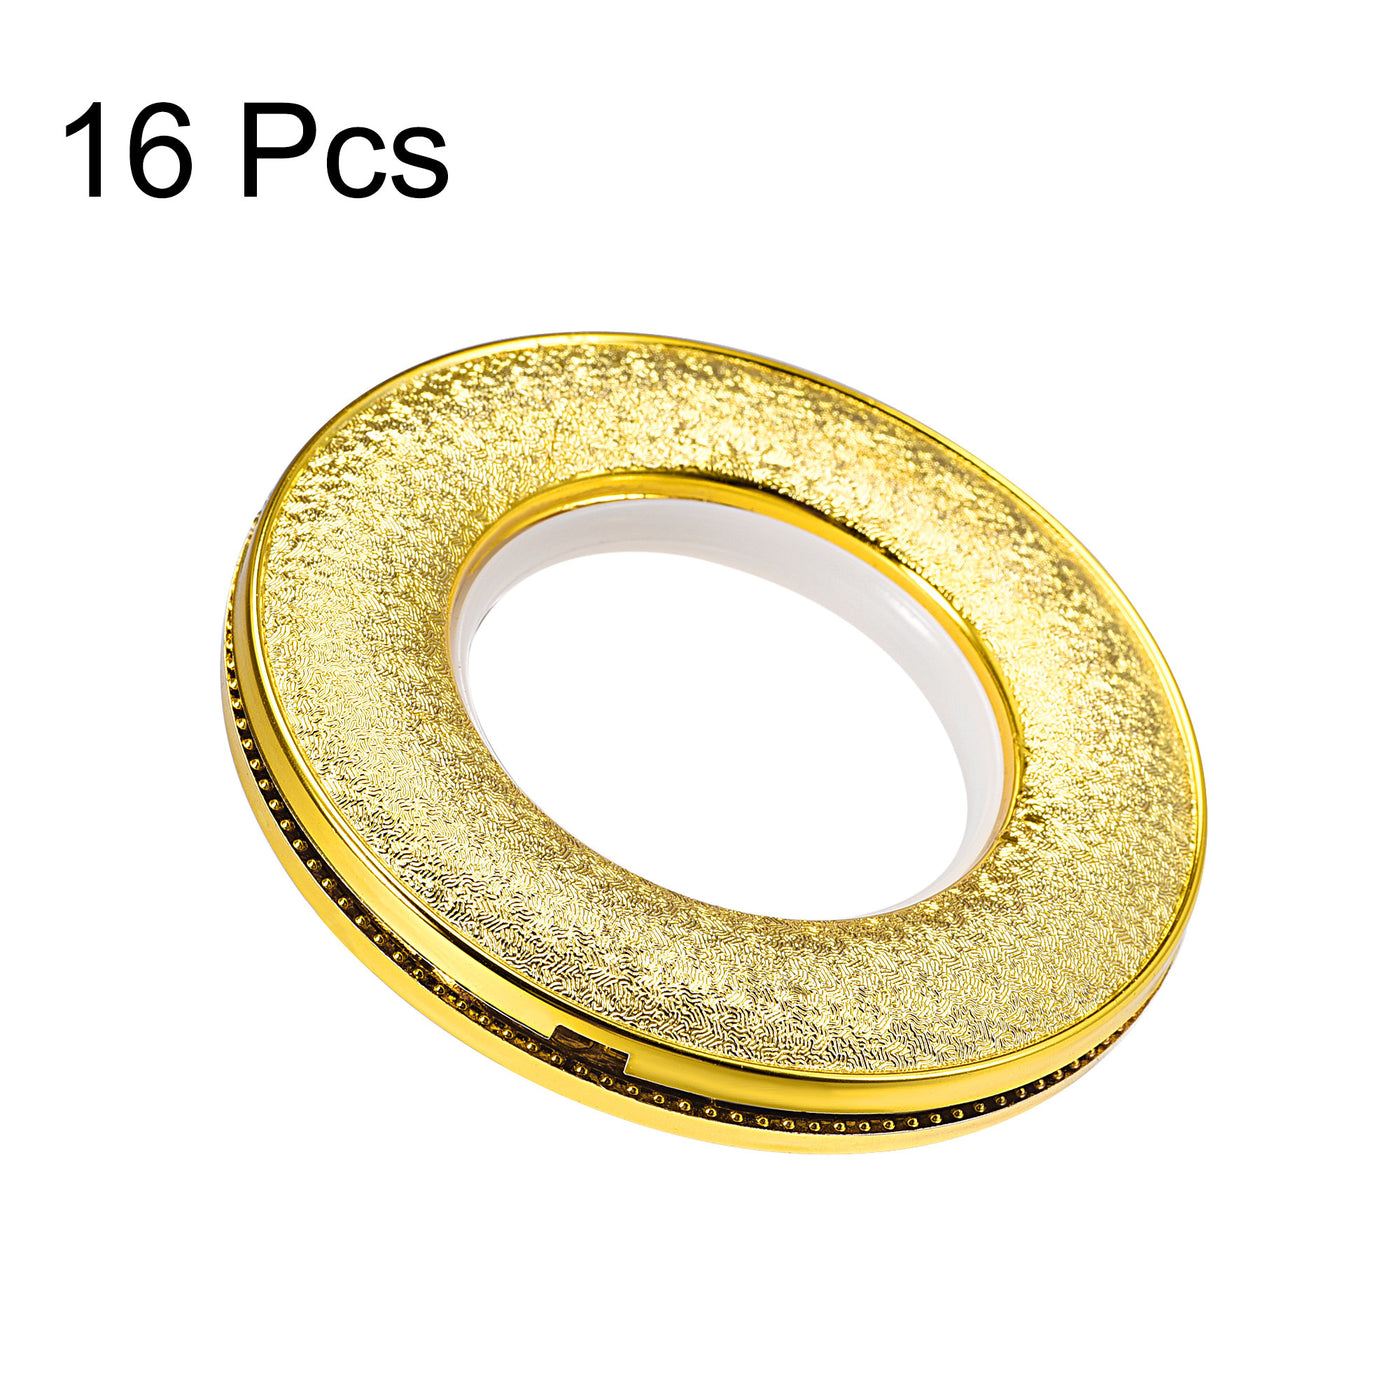 Uxcell Uxcell Curtain Grommets, 42mm Curtain Eyelets Roman Rings Home Decor Bright Gold 16pcs